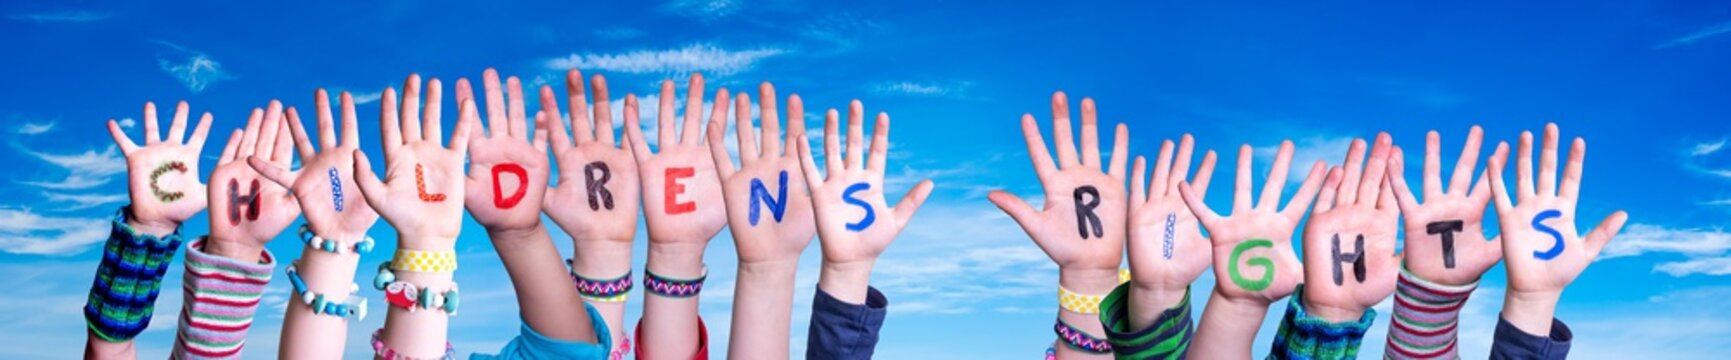 Children Hands Building Colorful English Word Children Rights. Blue Sky As Background